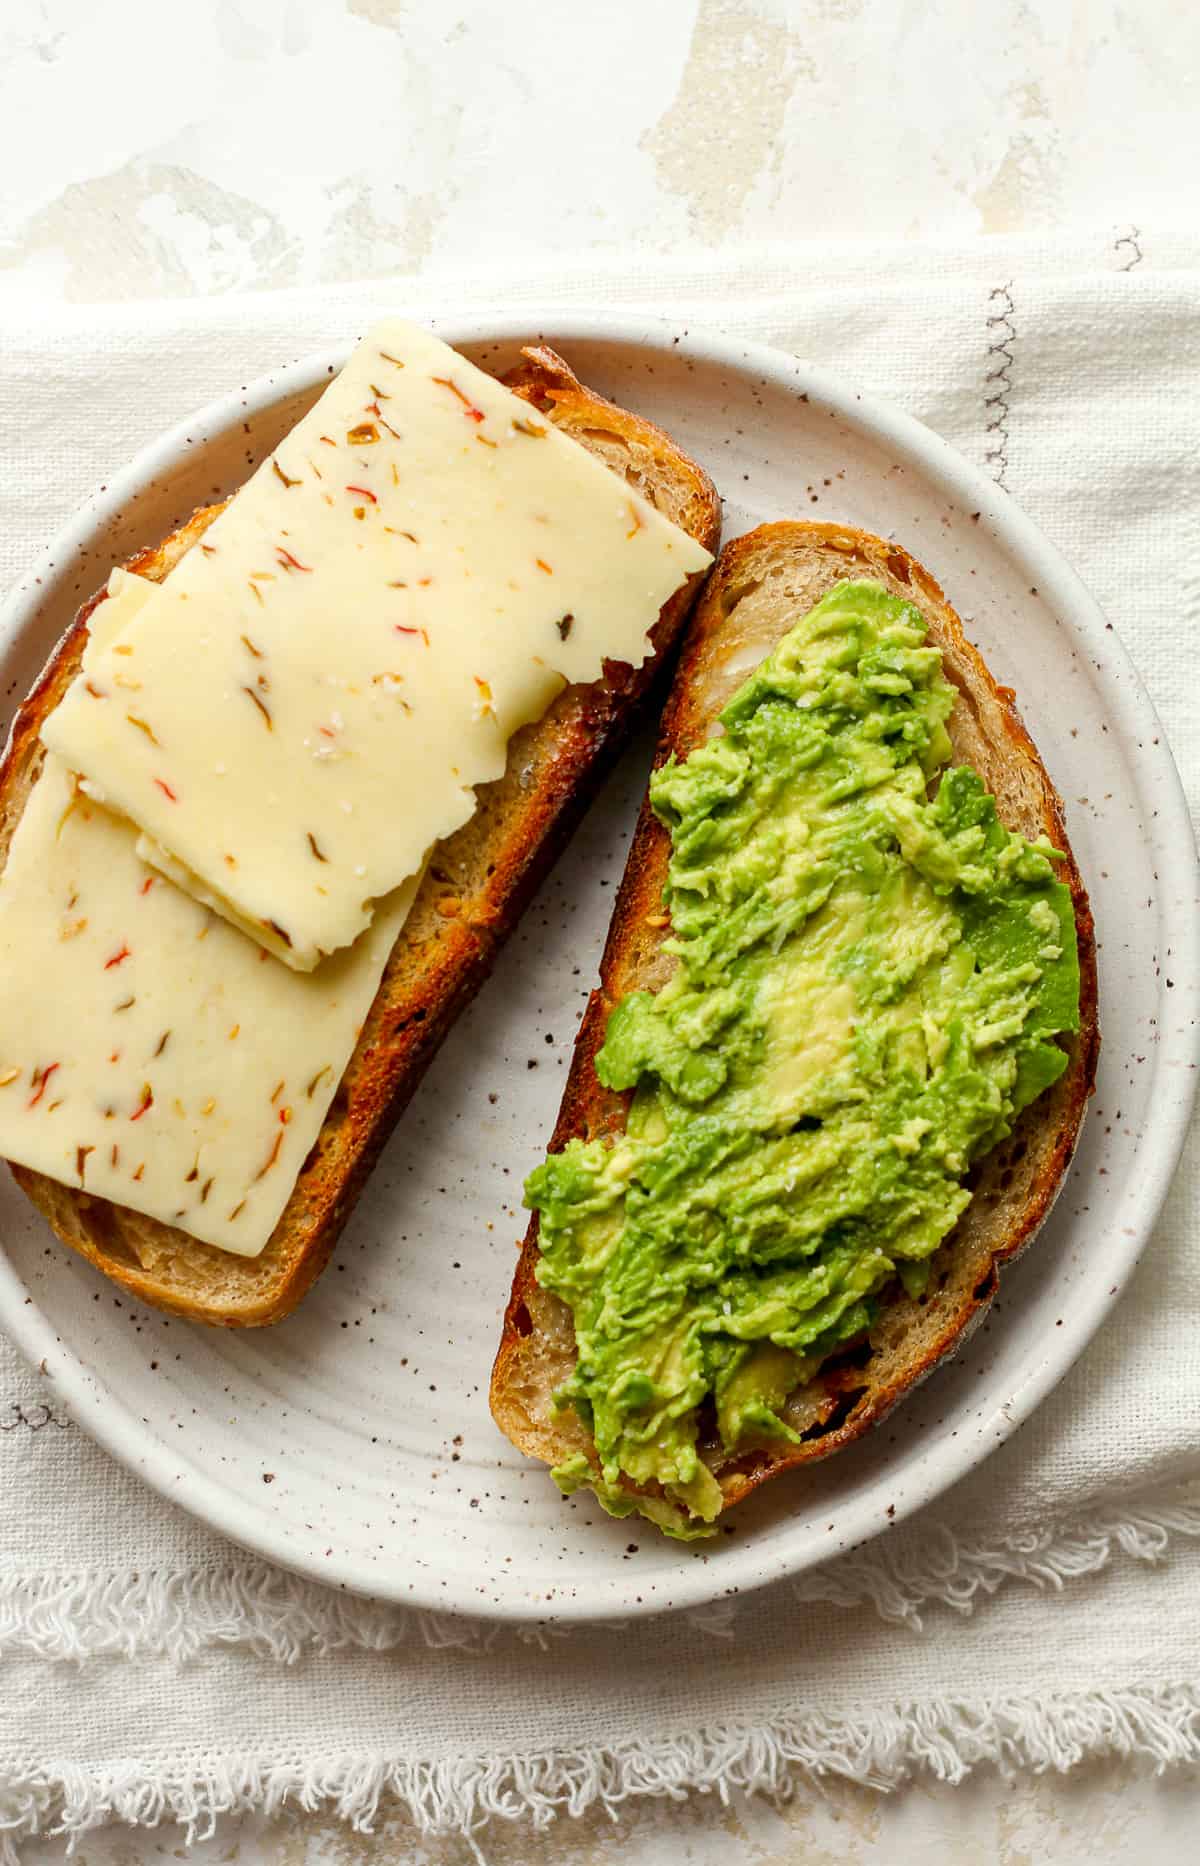 Garlic sourdough bread, toasted with pepper jack cheese and smashed avocado (two slices).